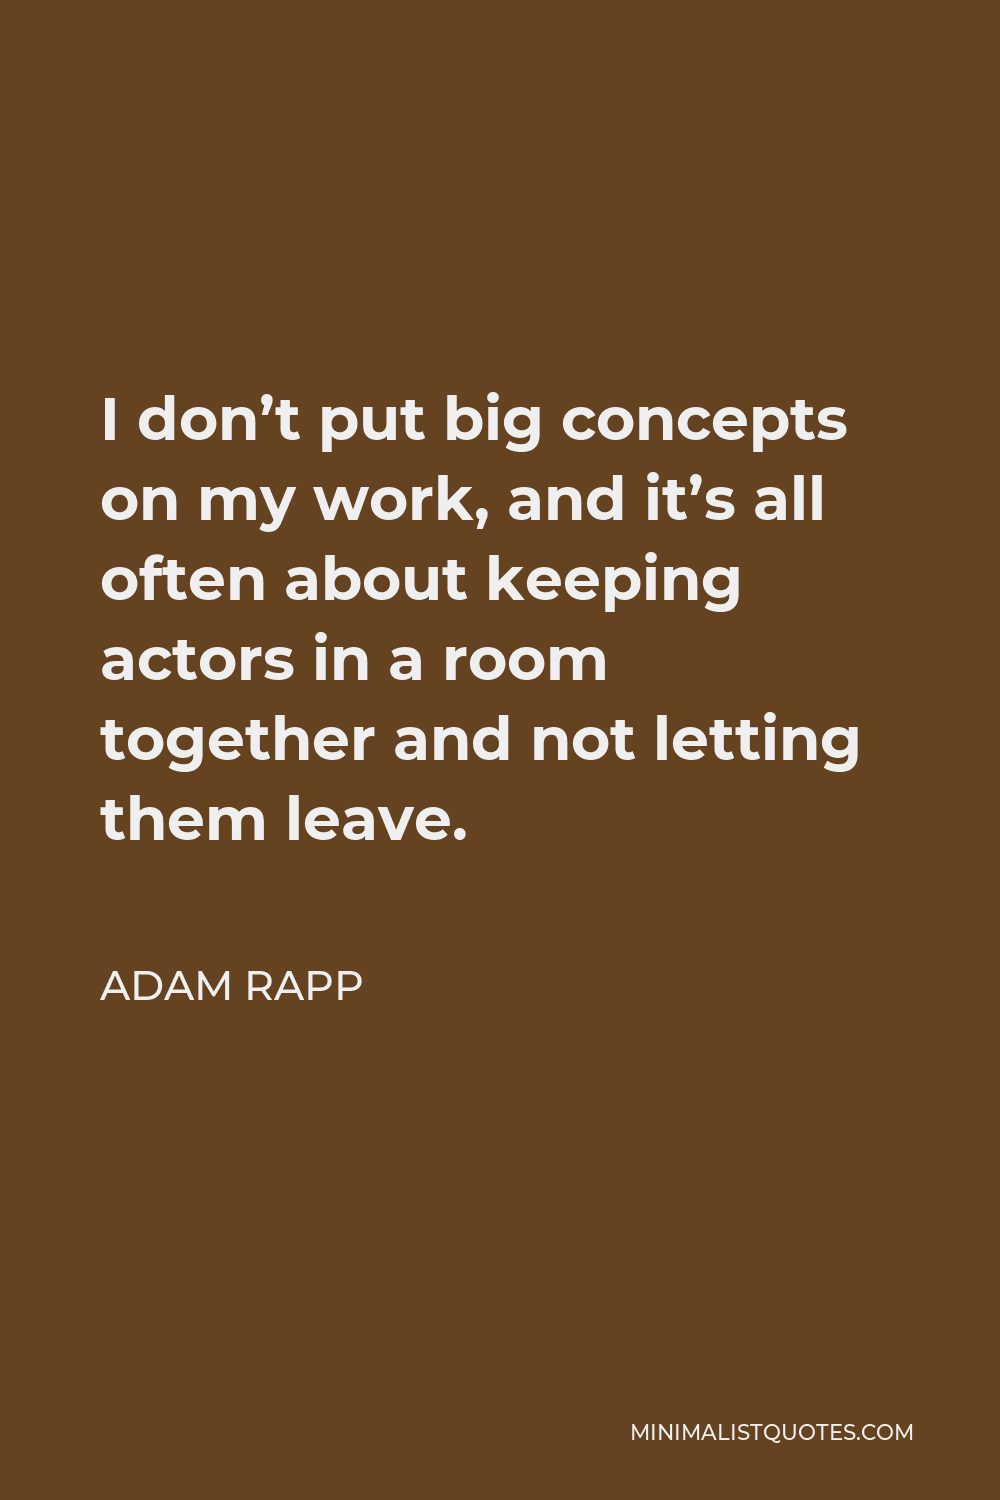 Adam Rapp Quote - I don’t put big concepts on my work, and it’s all often about keeping actors in a room together and not letting them leave.